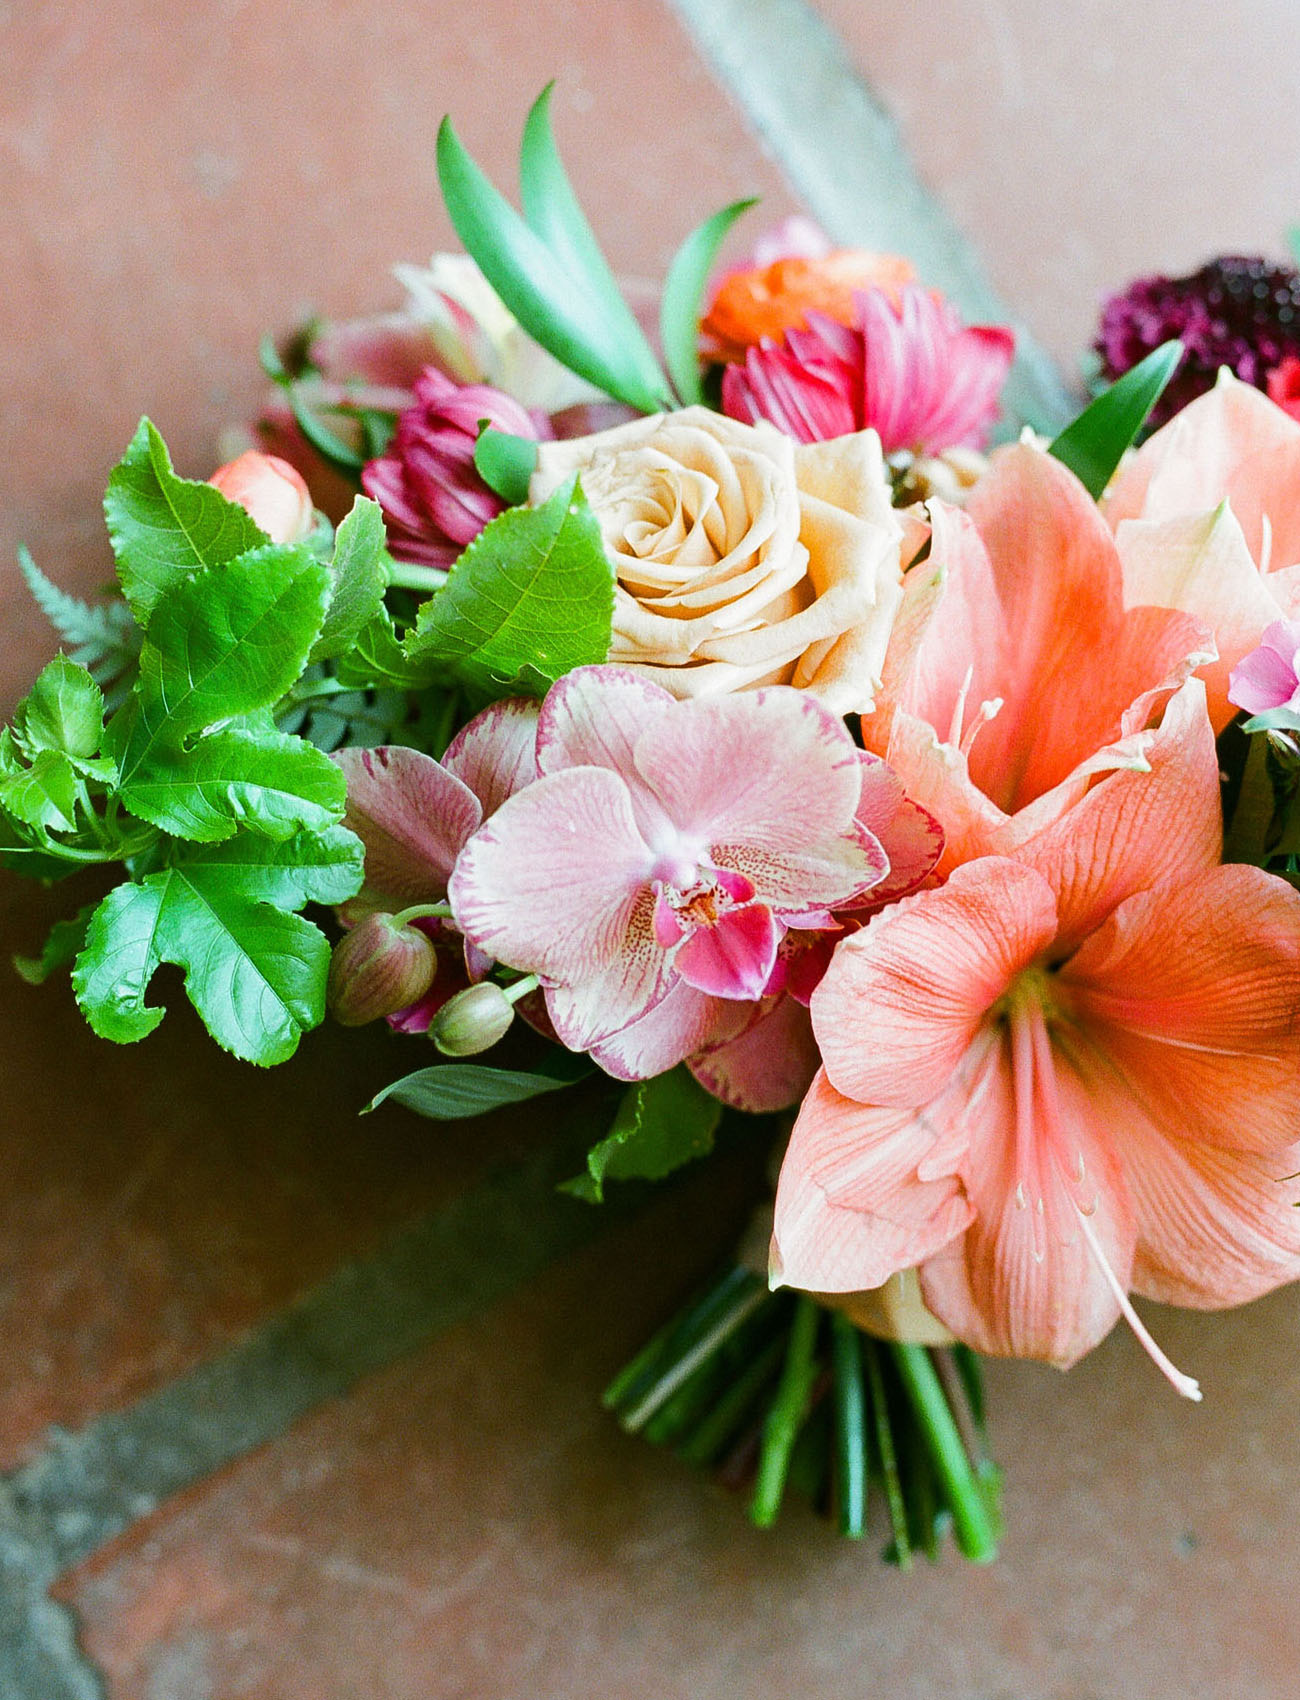 The wedding bouquet was done with hot pink and bright coral blooms and greenery